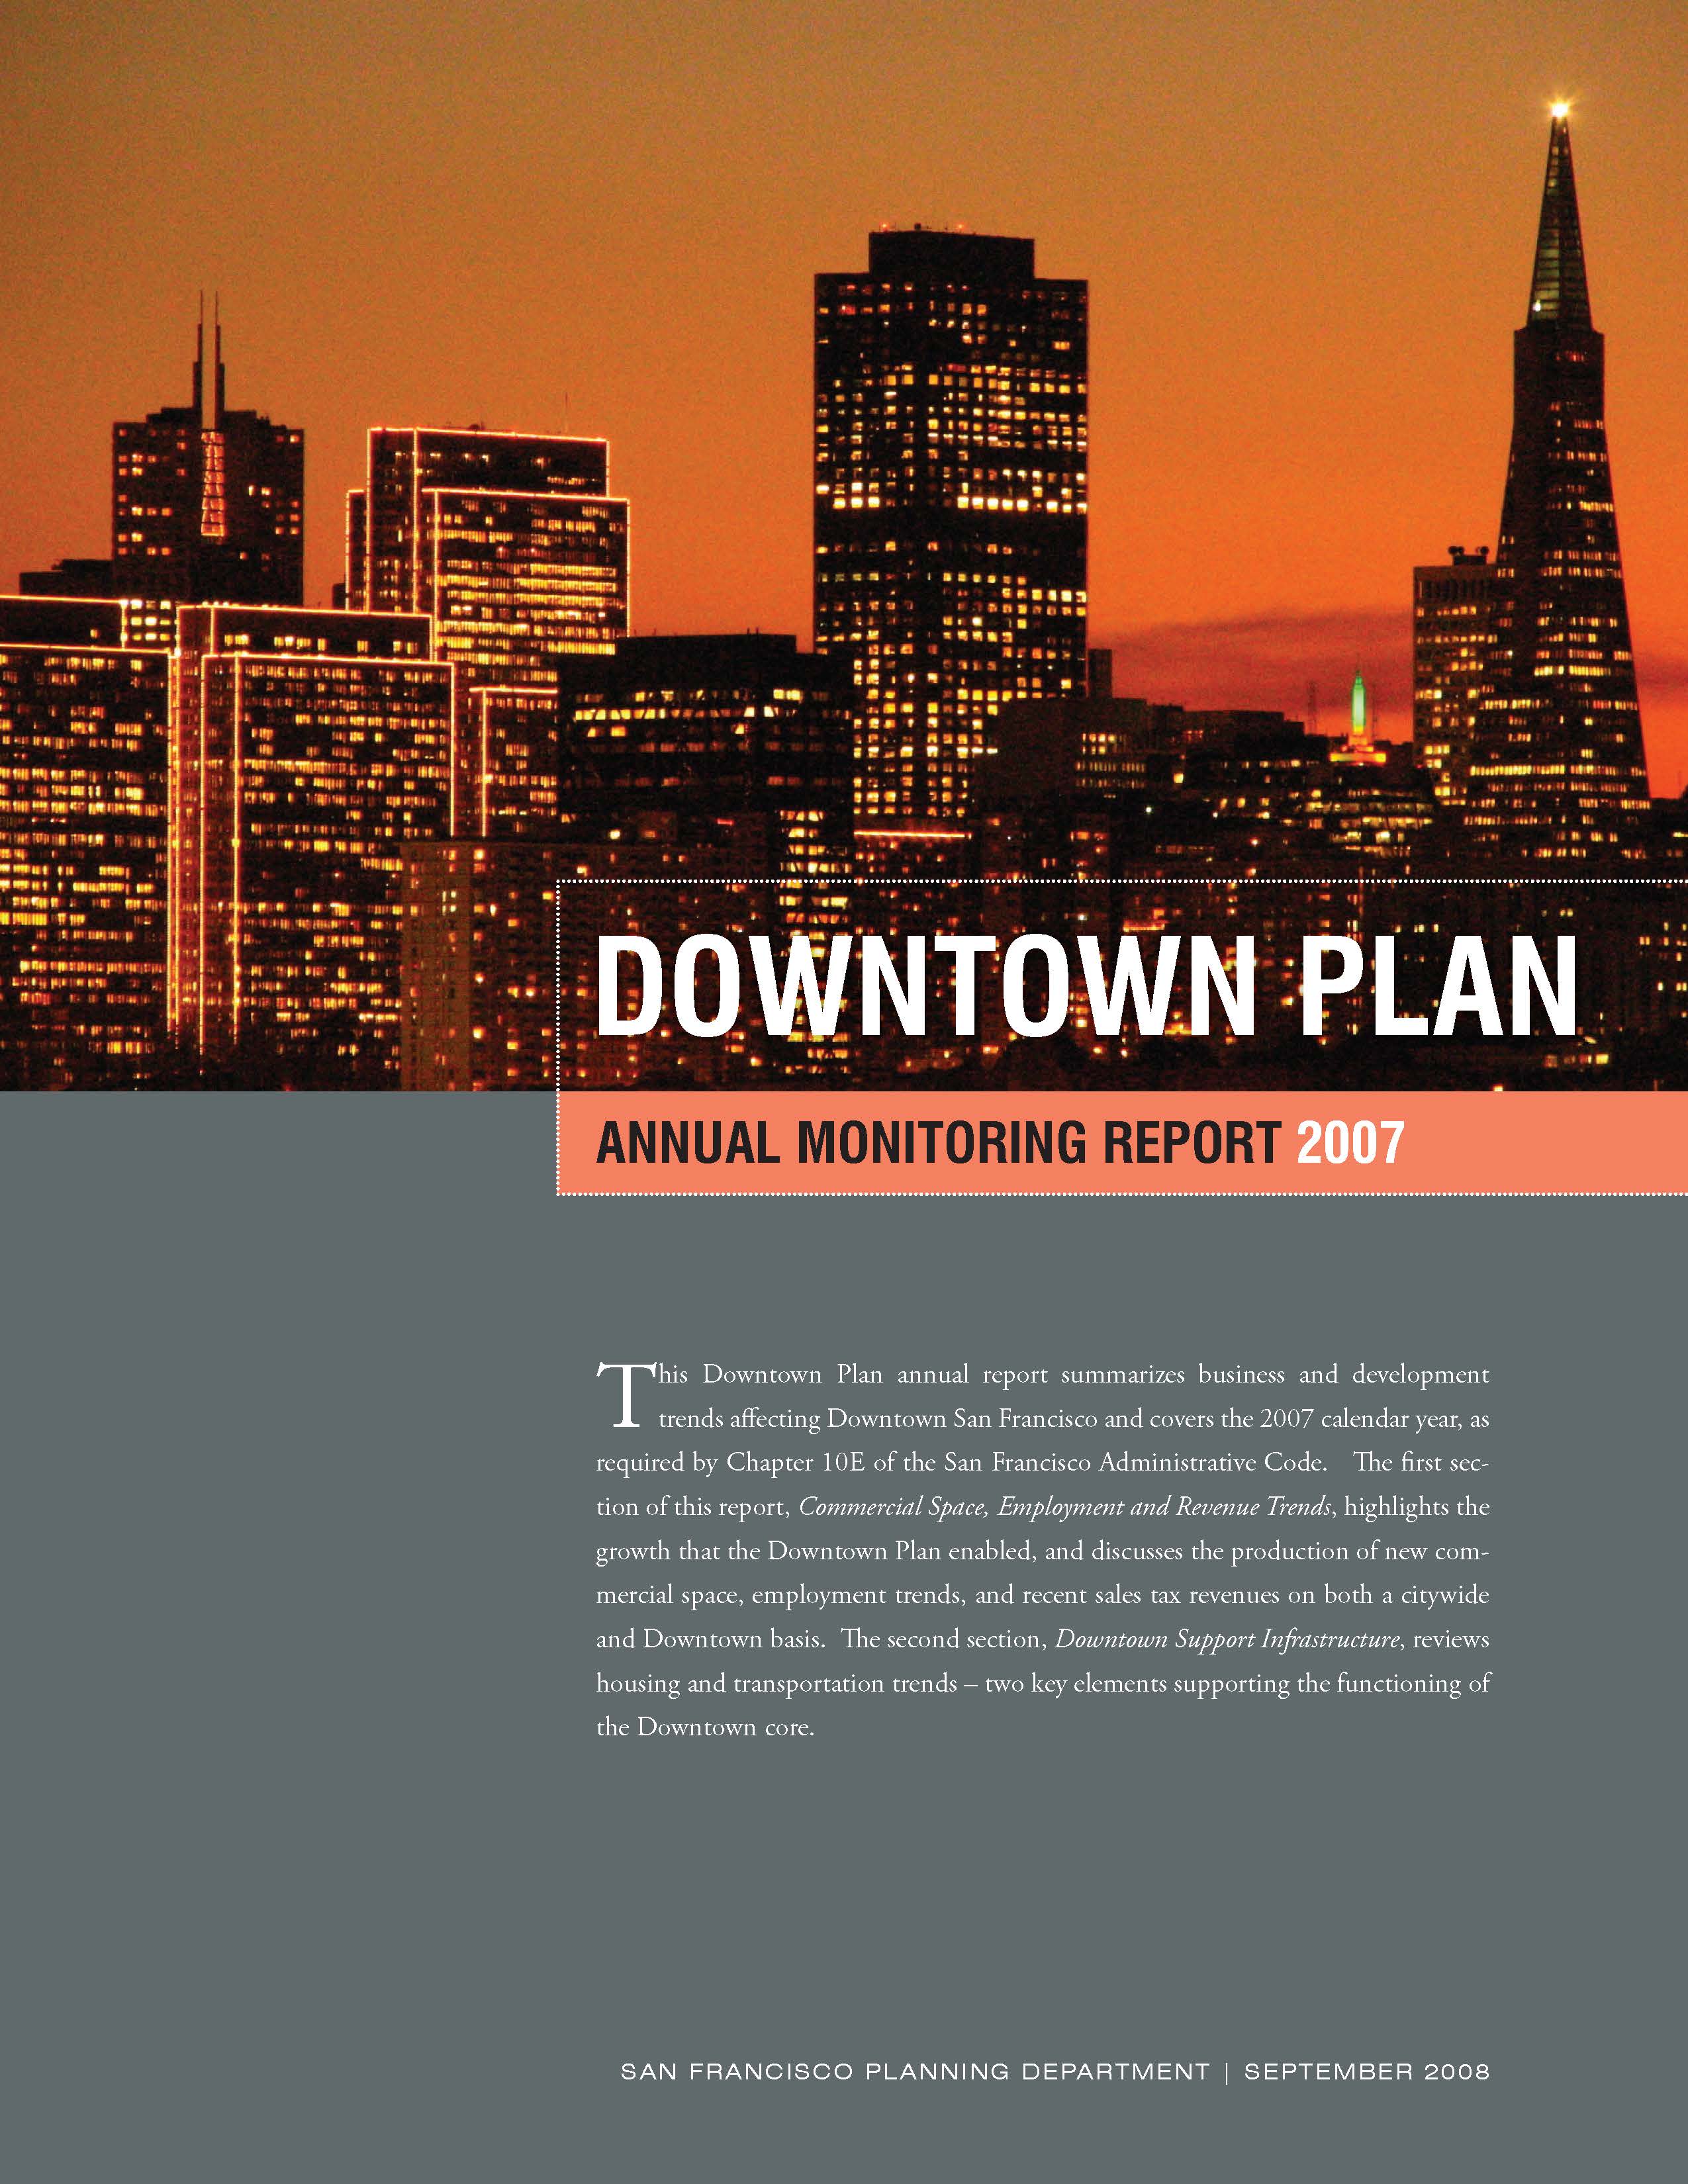 Cover Image for the Downtown Plan Monitoring Report 2007